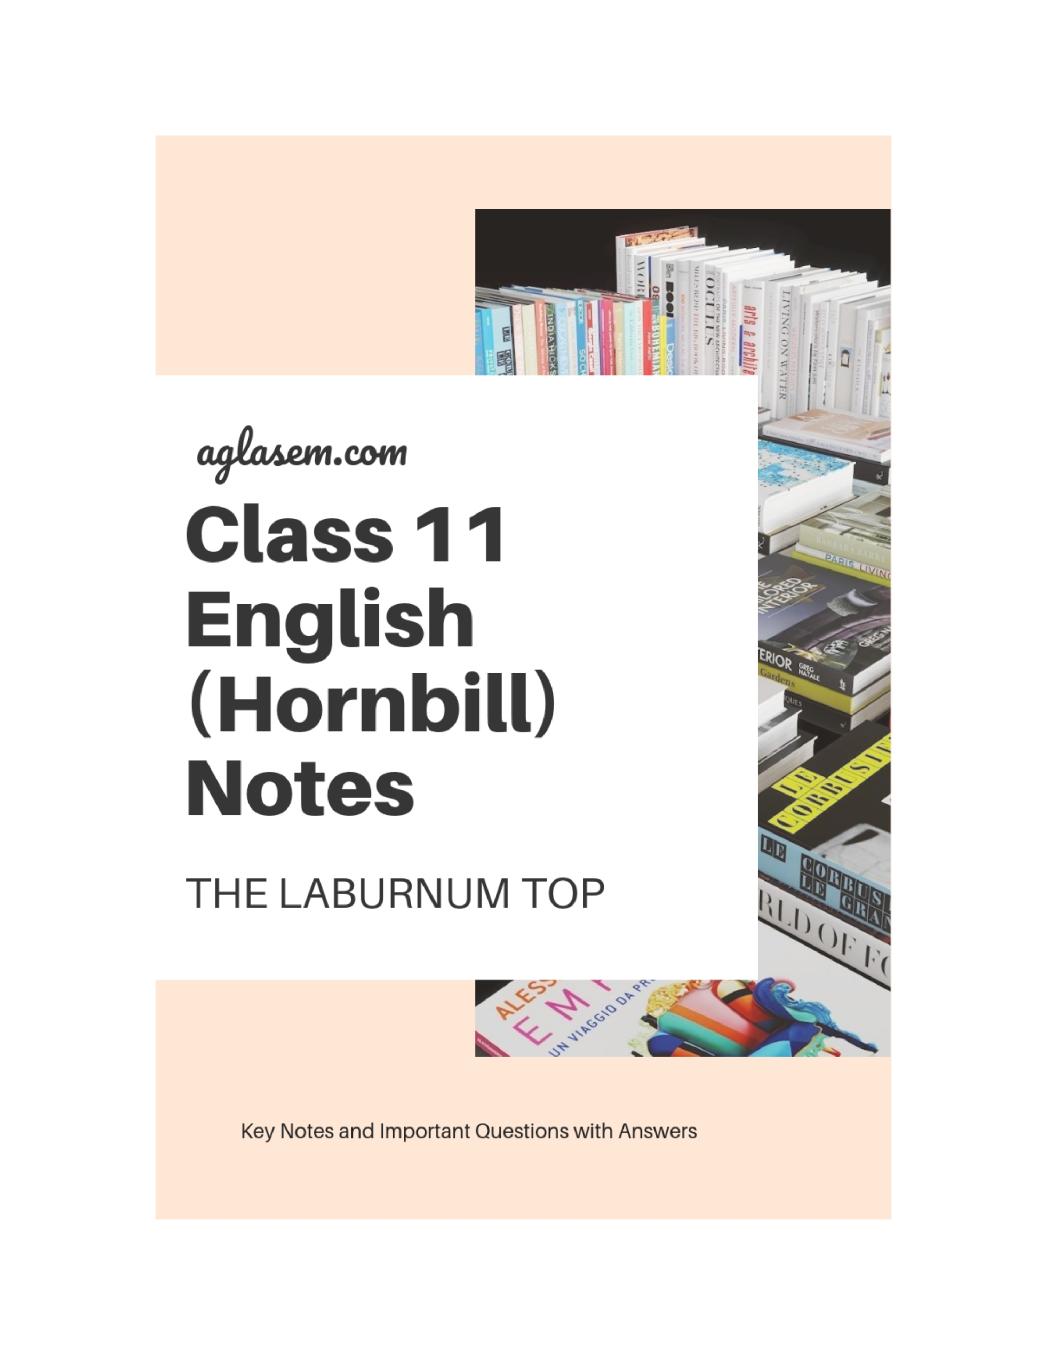 Class 11 English Hornbill Notes For The Laburnum Top - Page 1